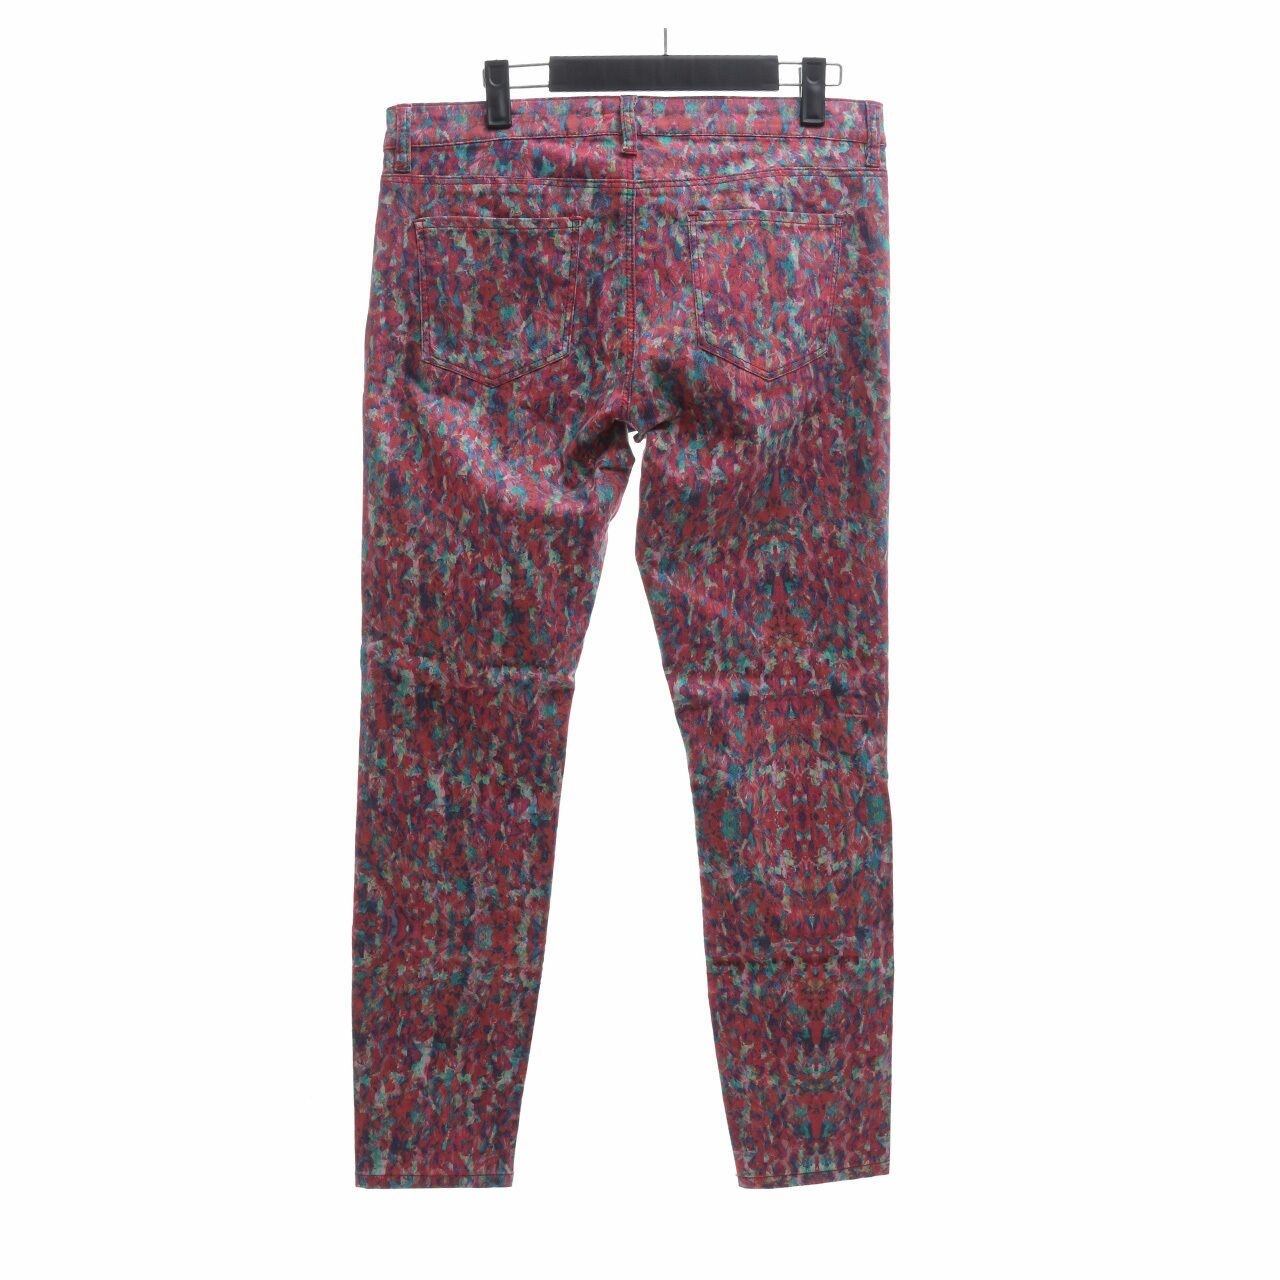 Witchery Pink Printed Long Pants